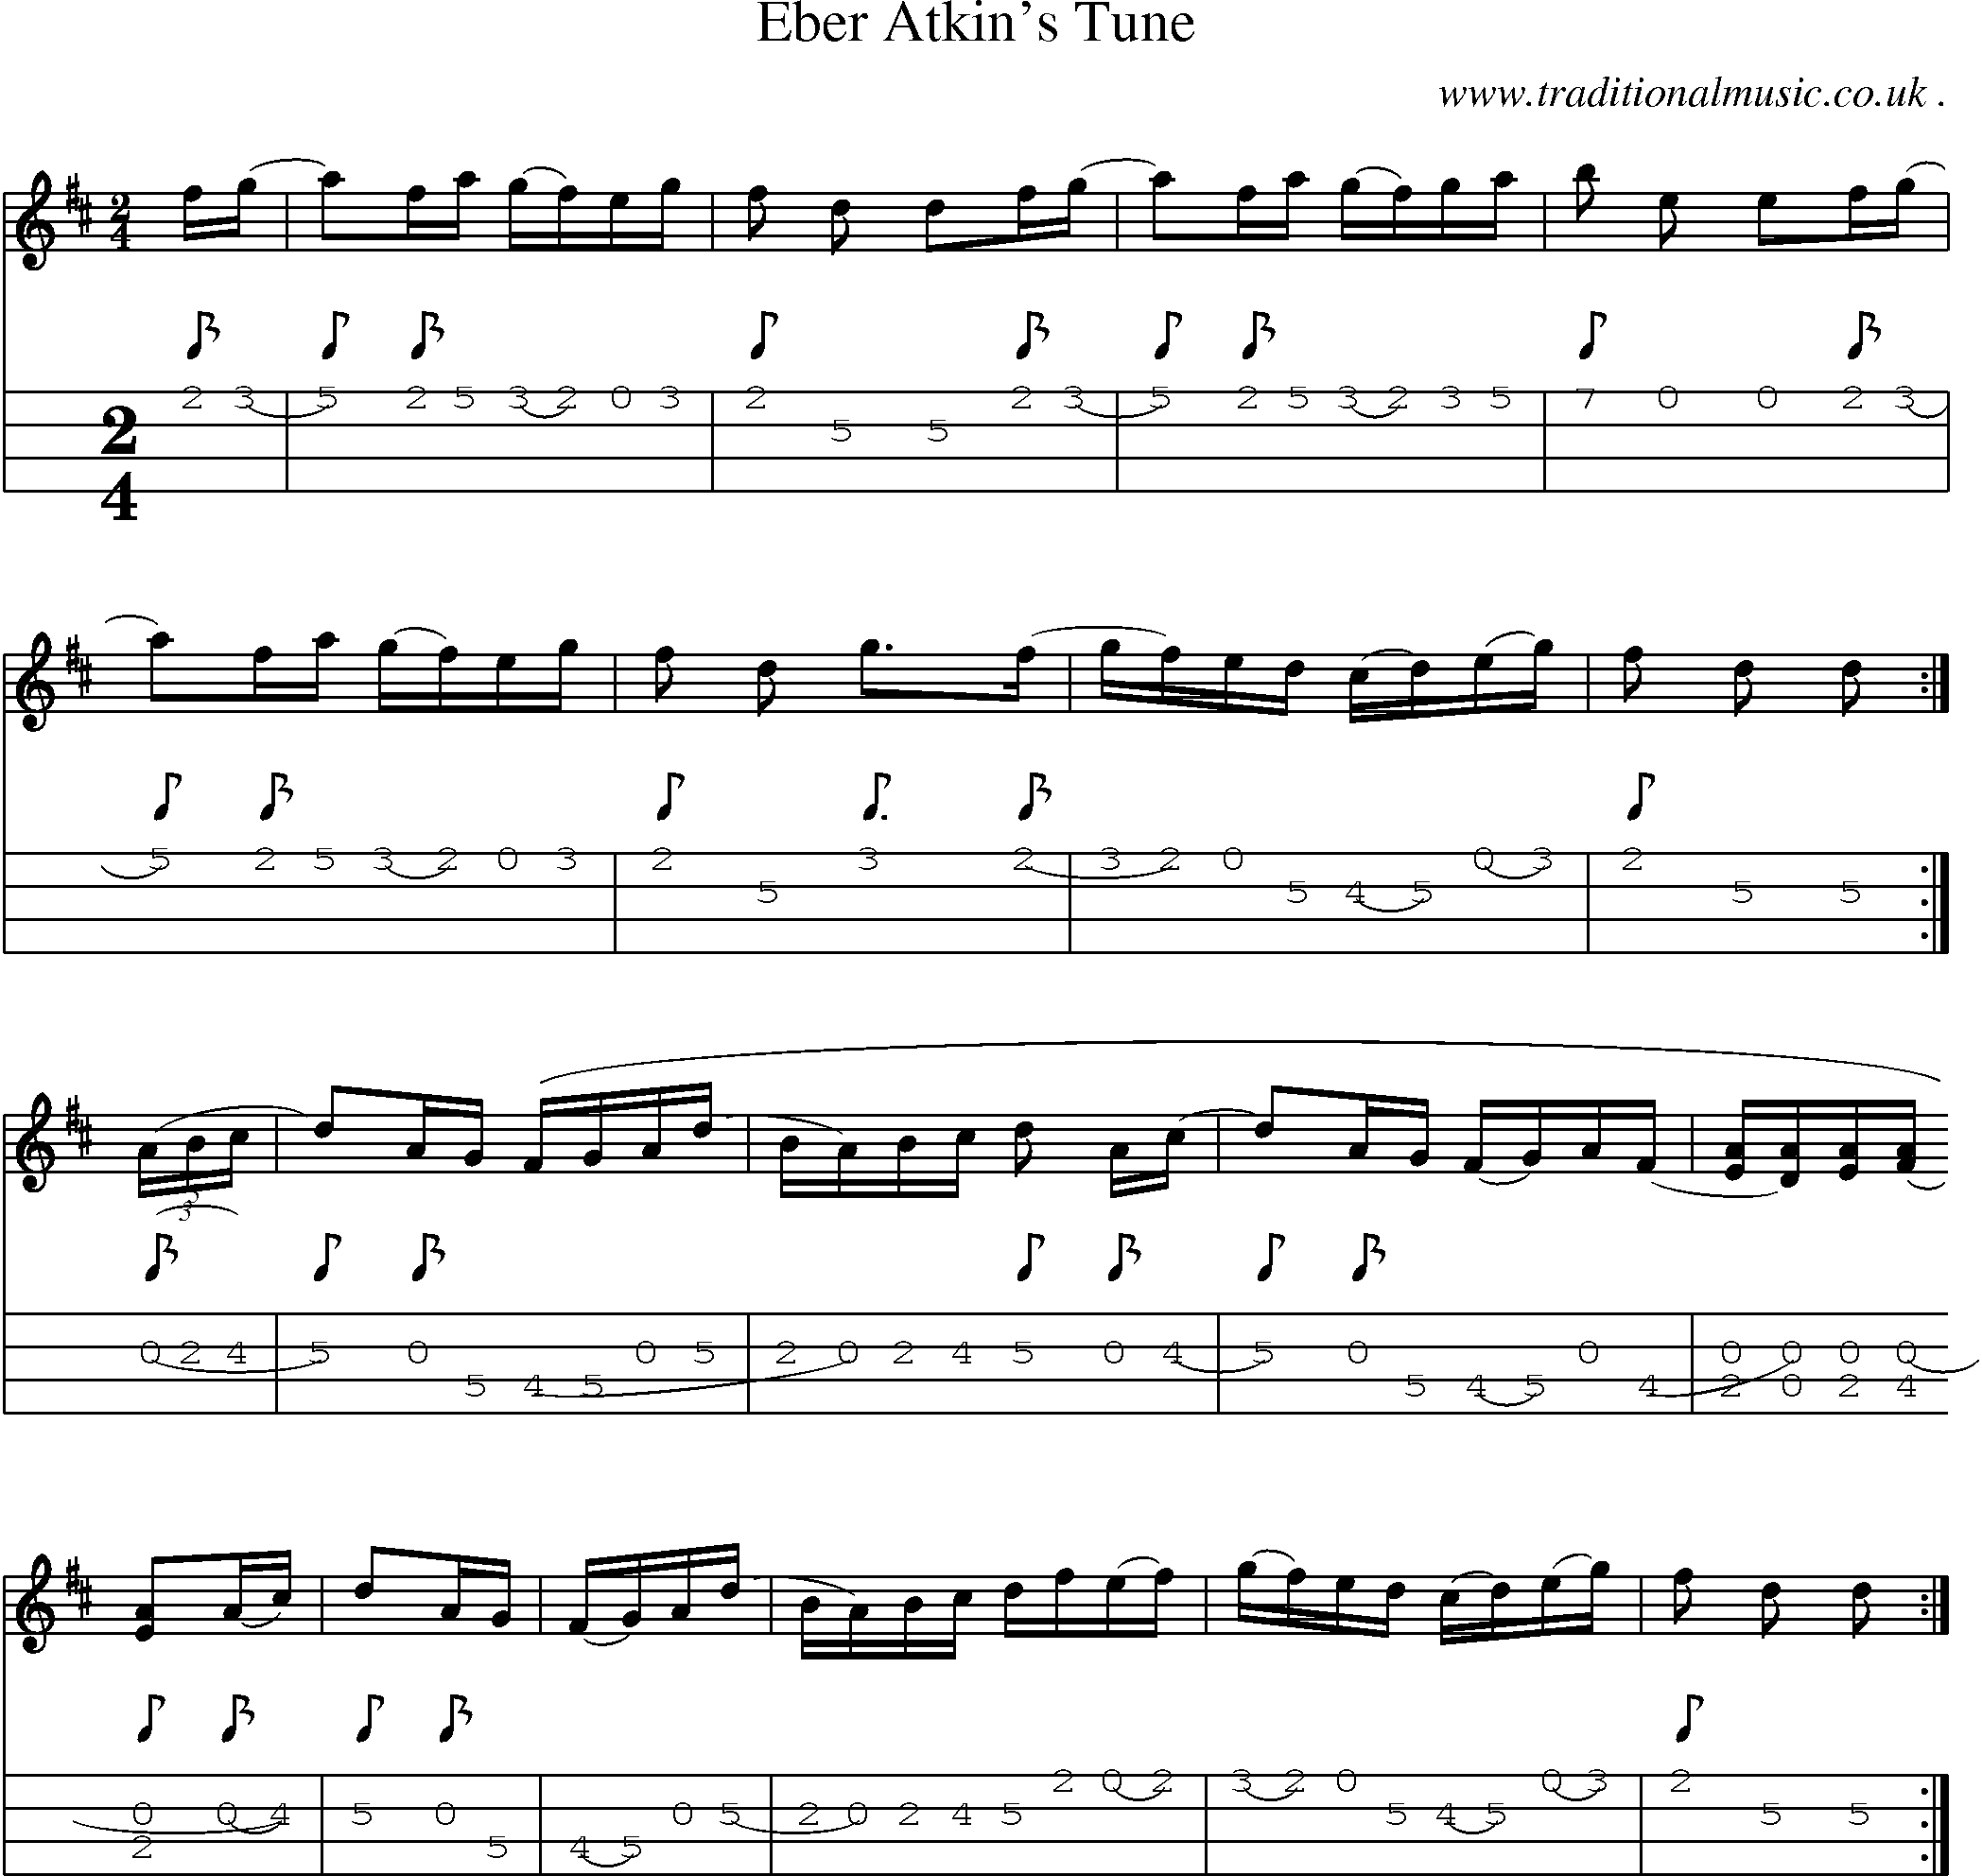 Music Score and Guitar Tabs for Eber Atkins Tune